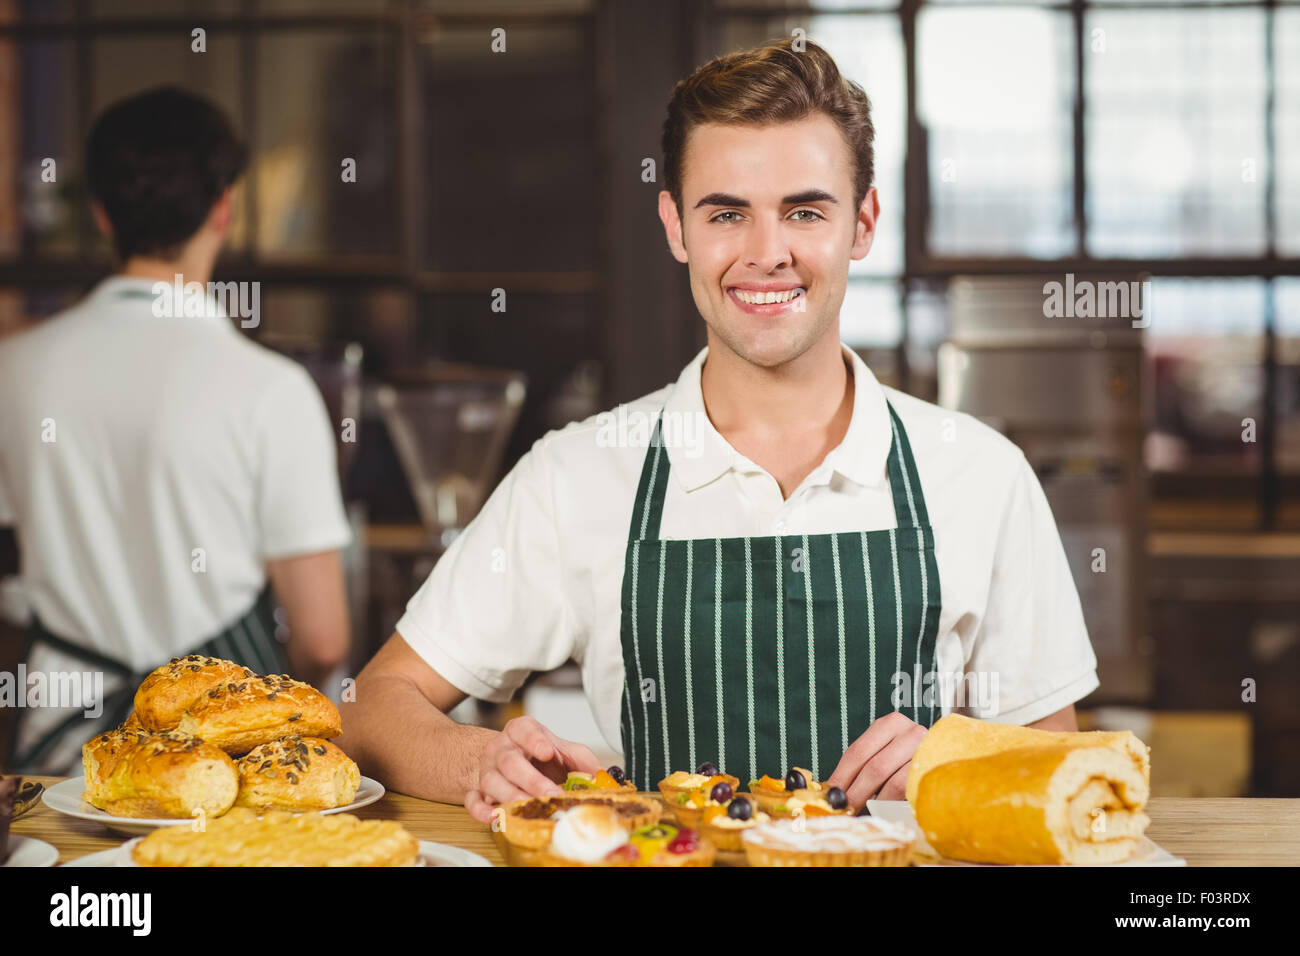 Smiling waiter tidying up the pastries Stock Photo